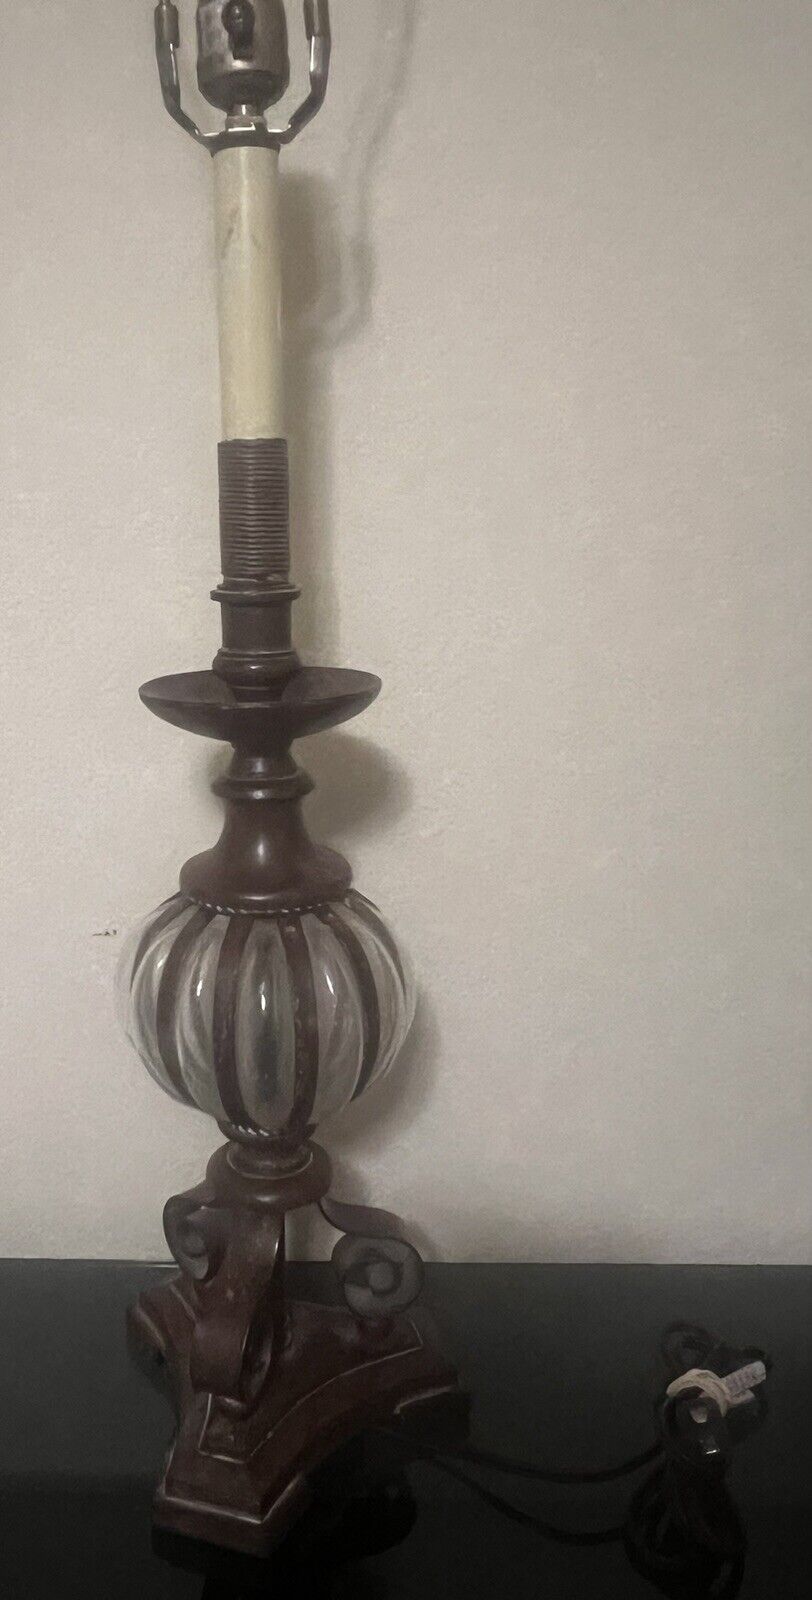 Vintage Home Decor Lamp Rare Find And Works Great